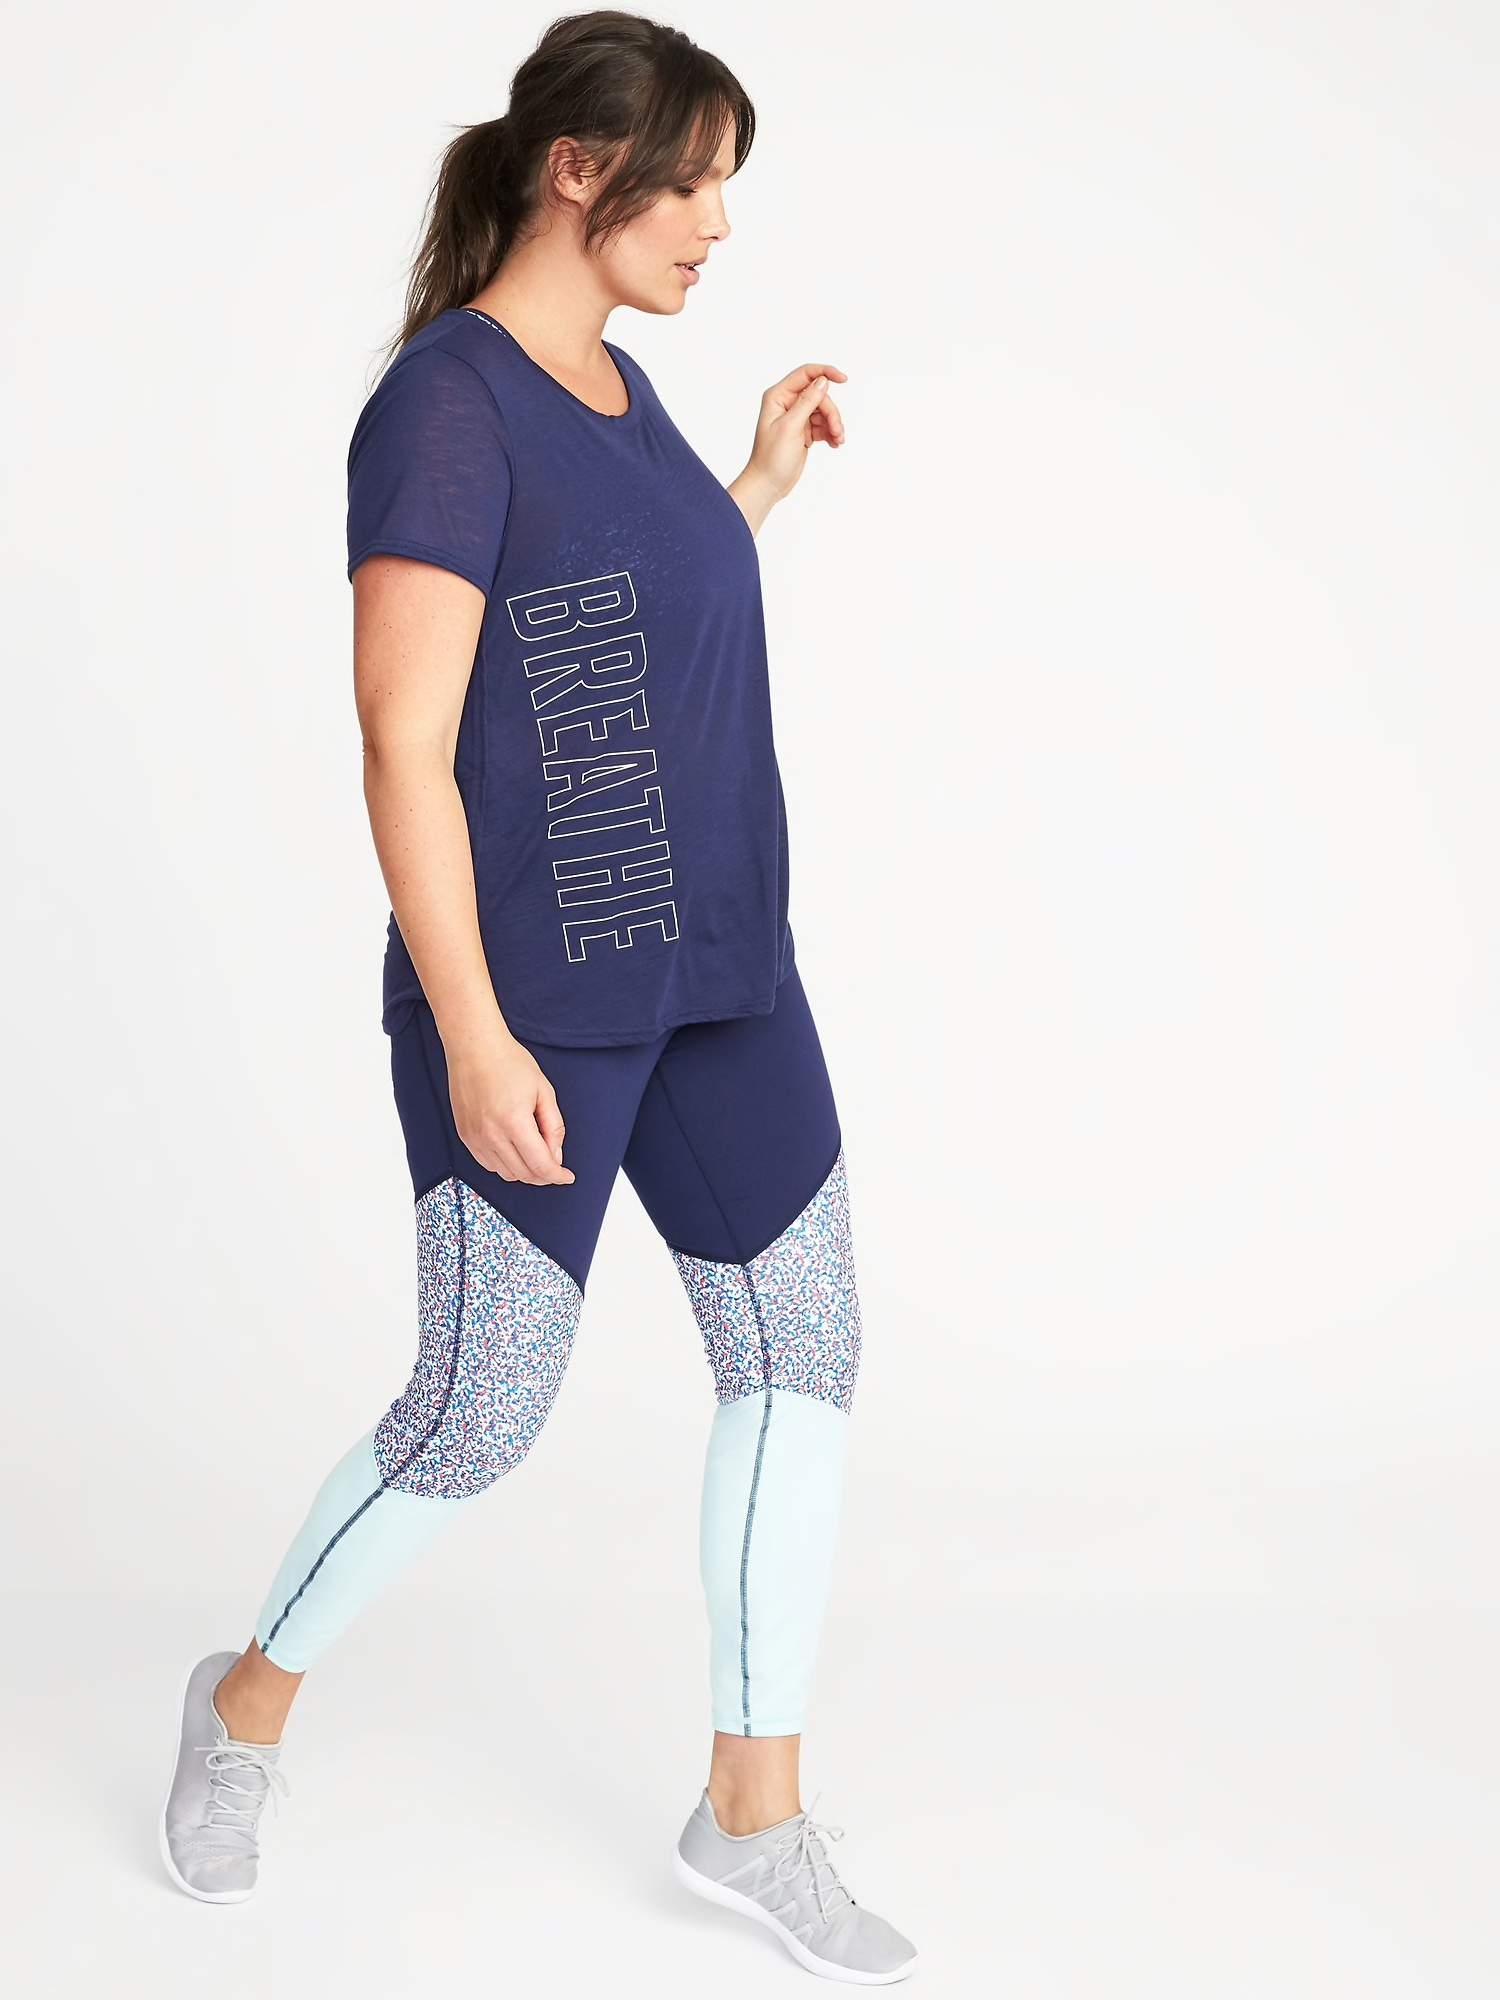 Function & Style: Plus Size Activewear